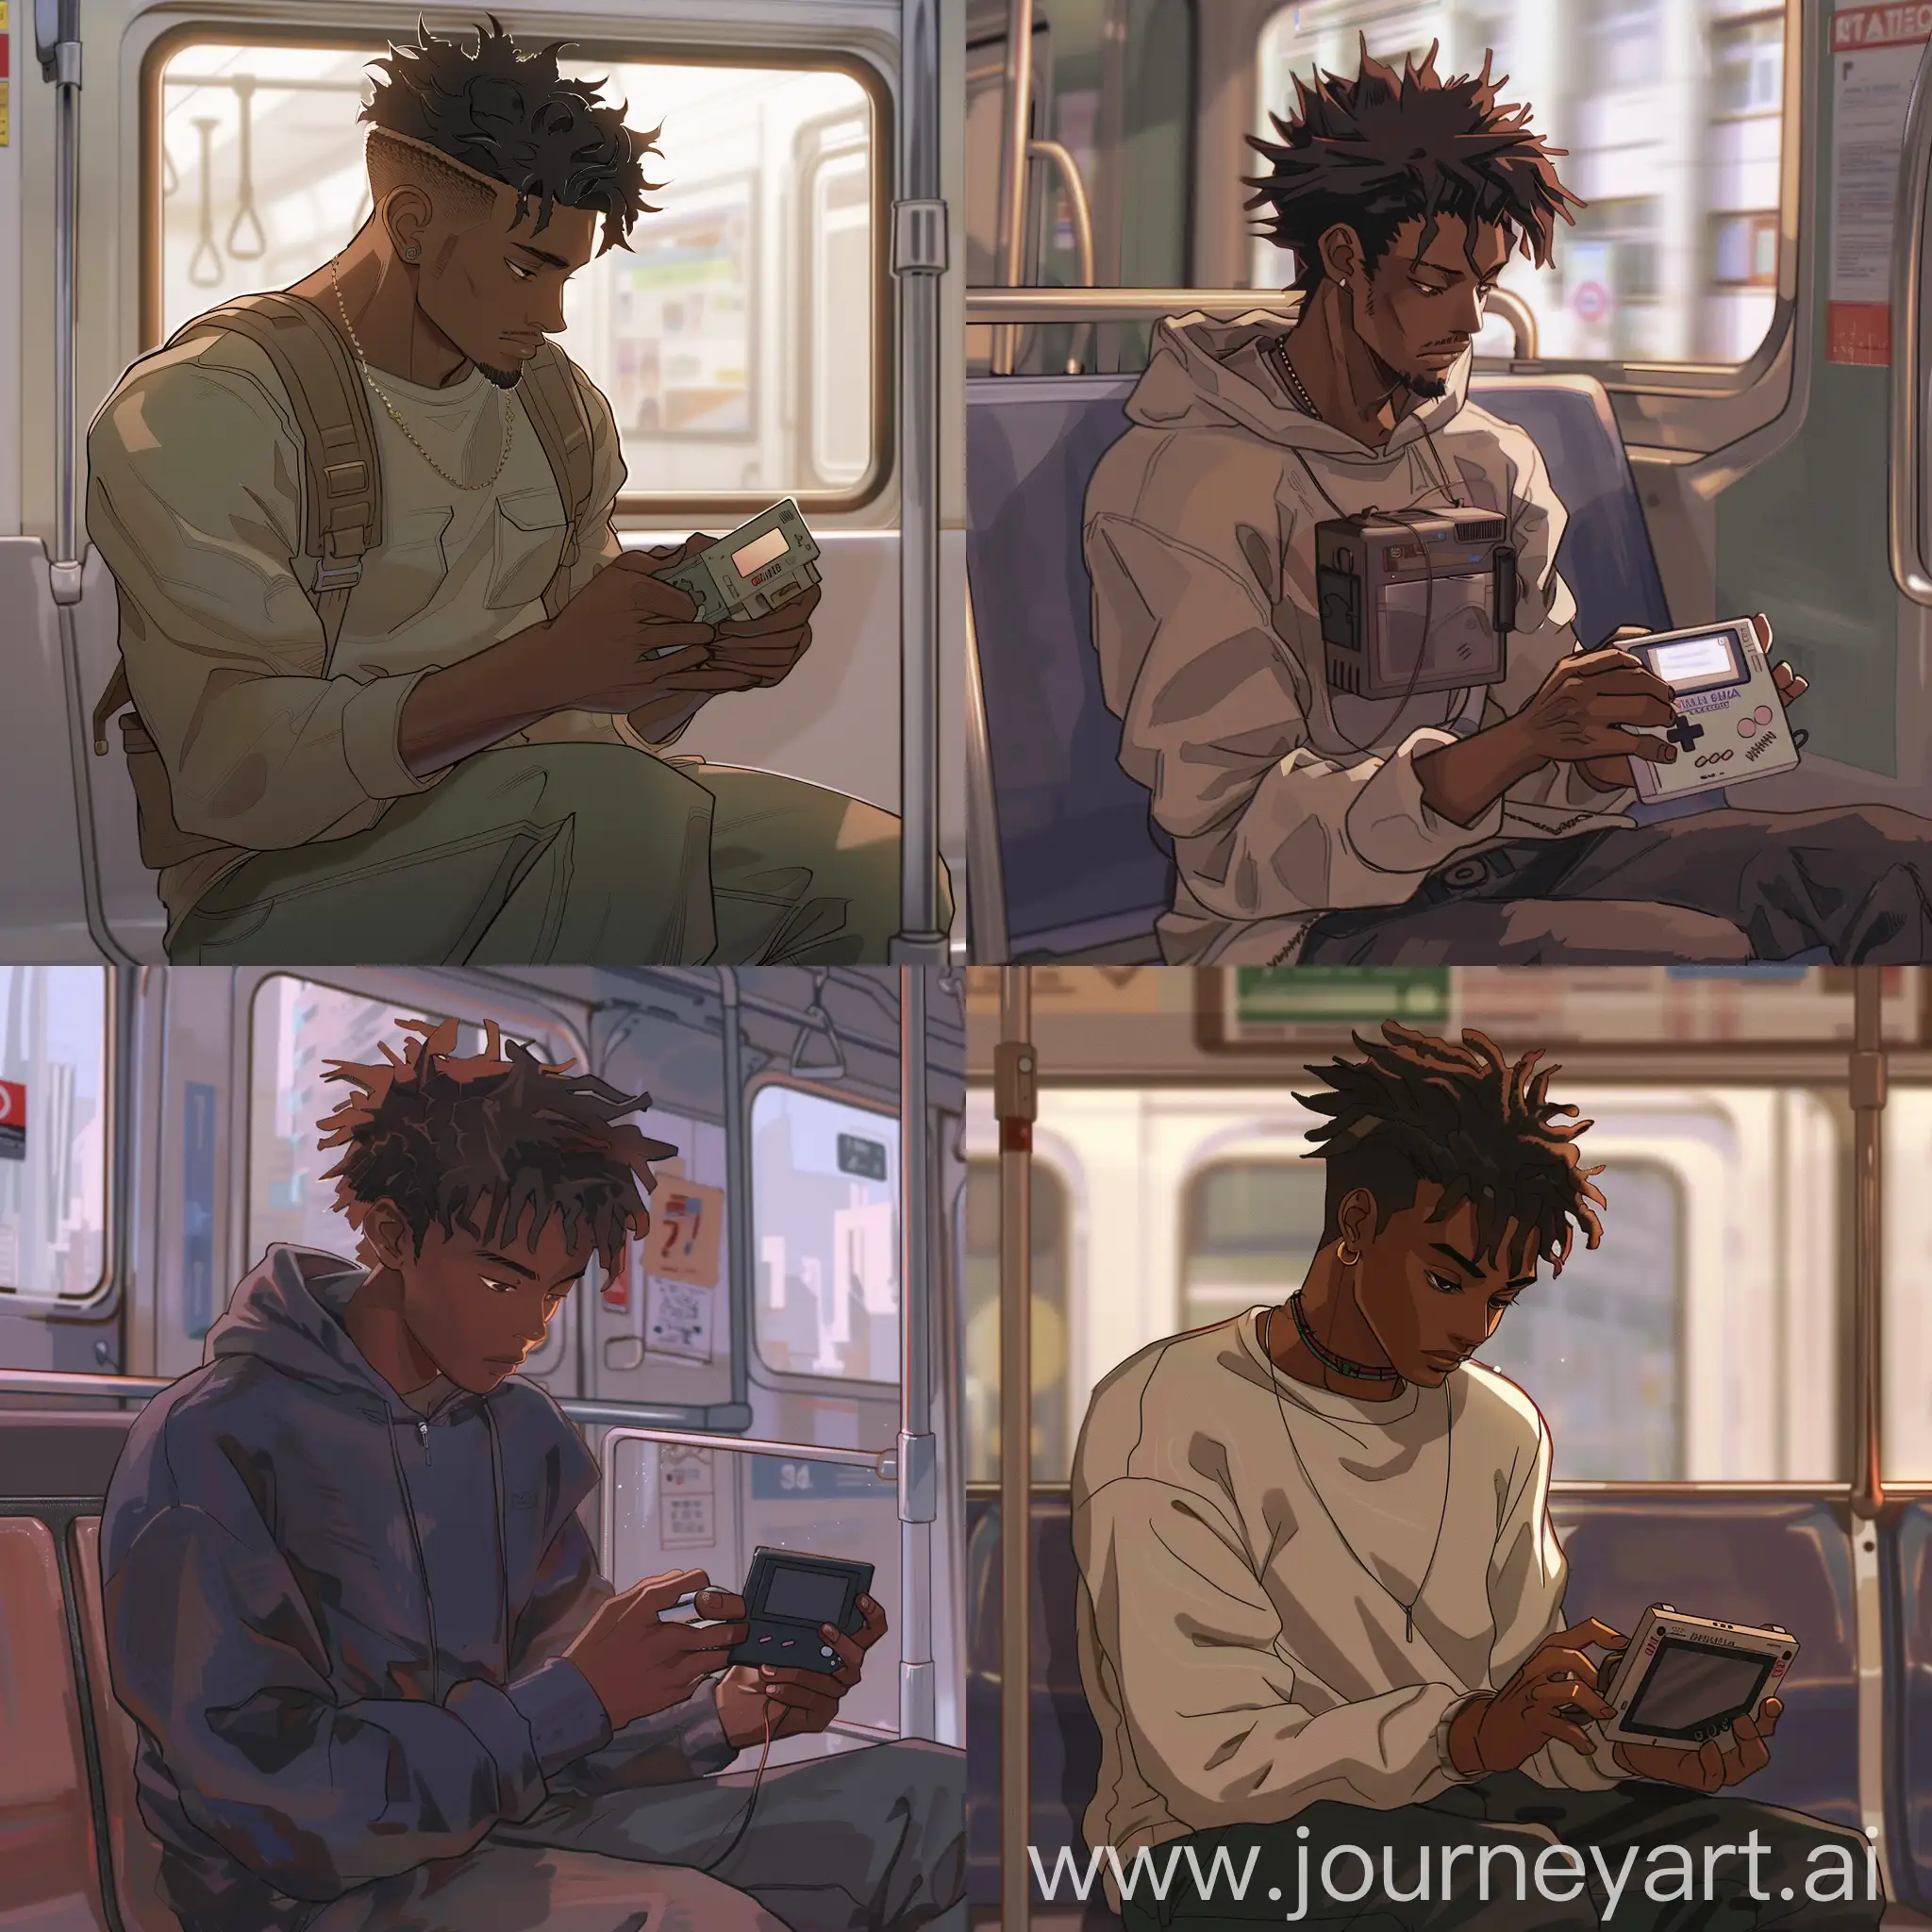 Anime-Style-Black-Man-Playing-Gameboy-on-Train